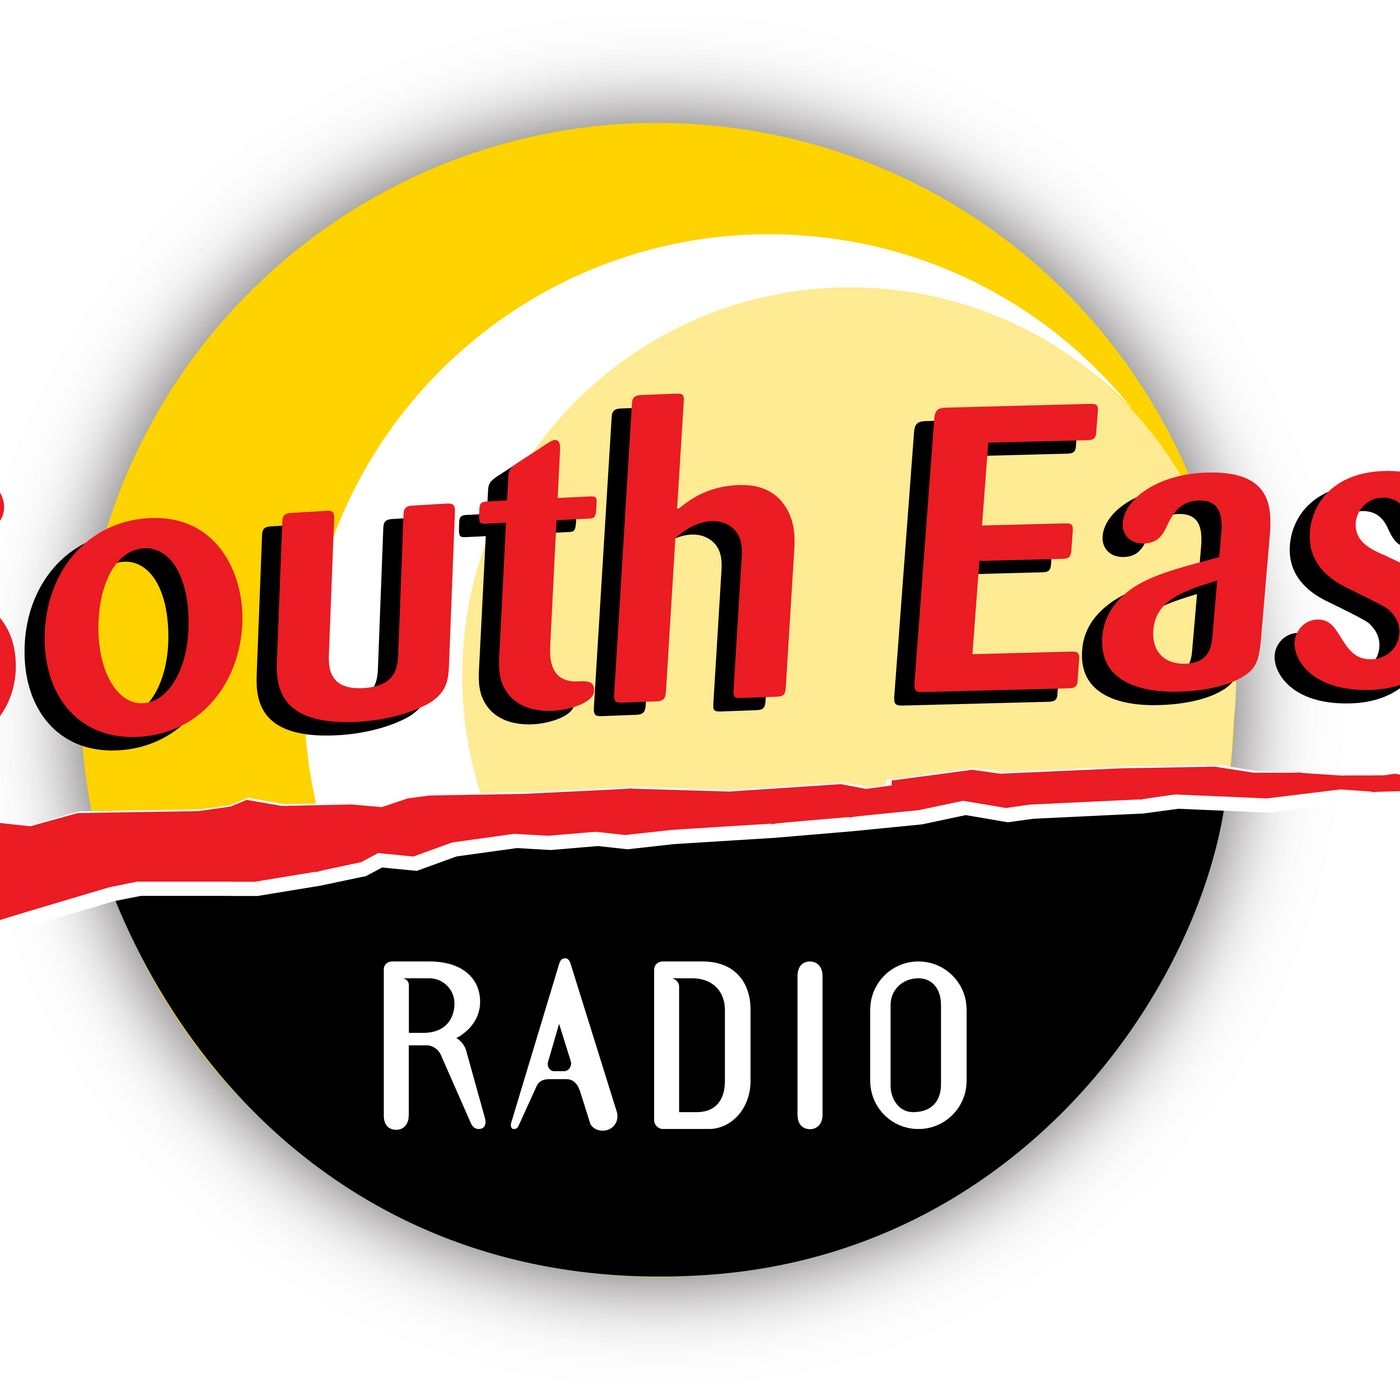 South East Radio Podcasts